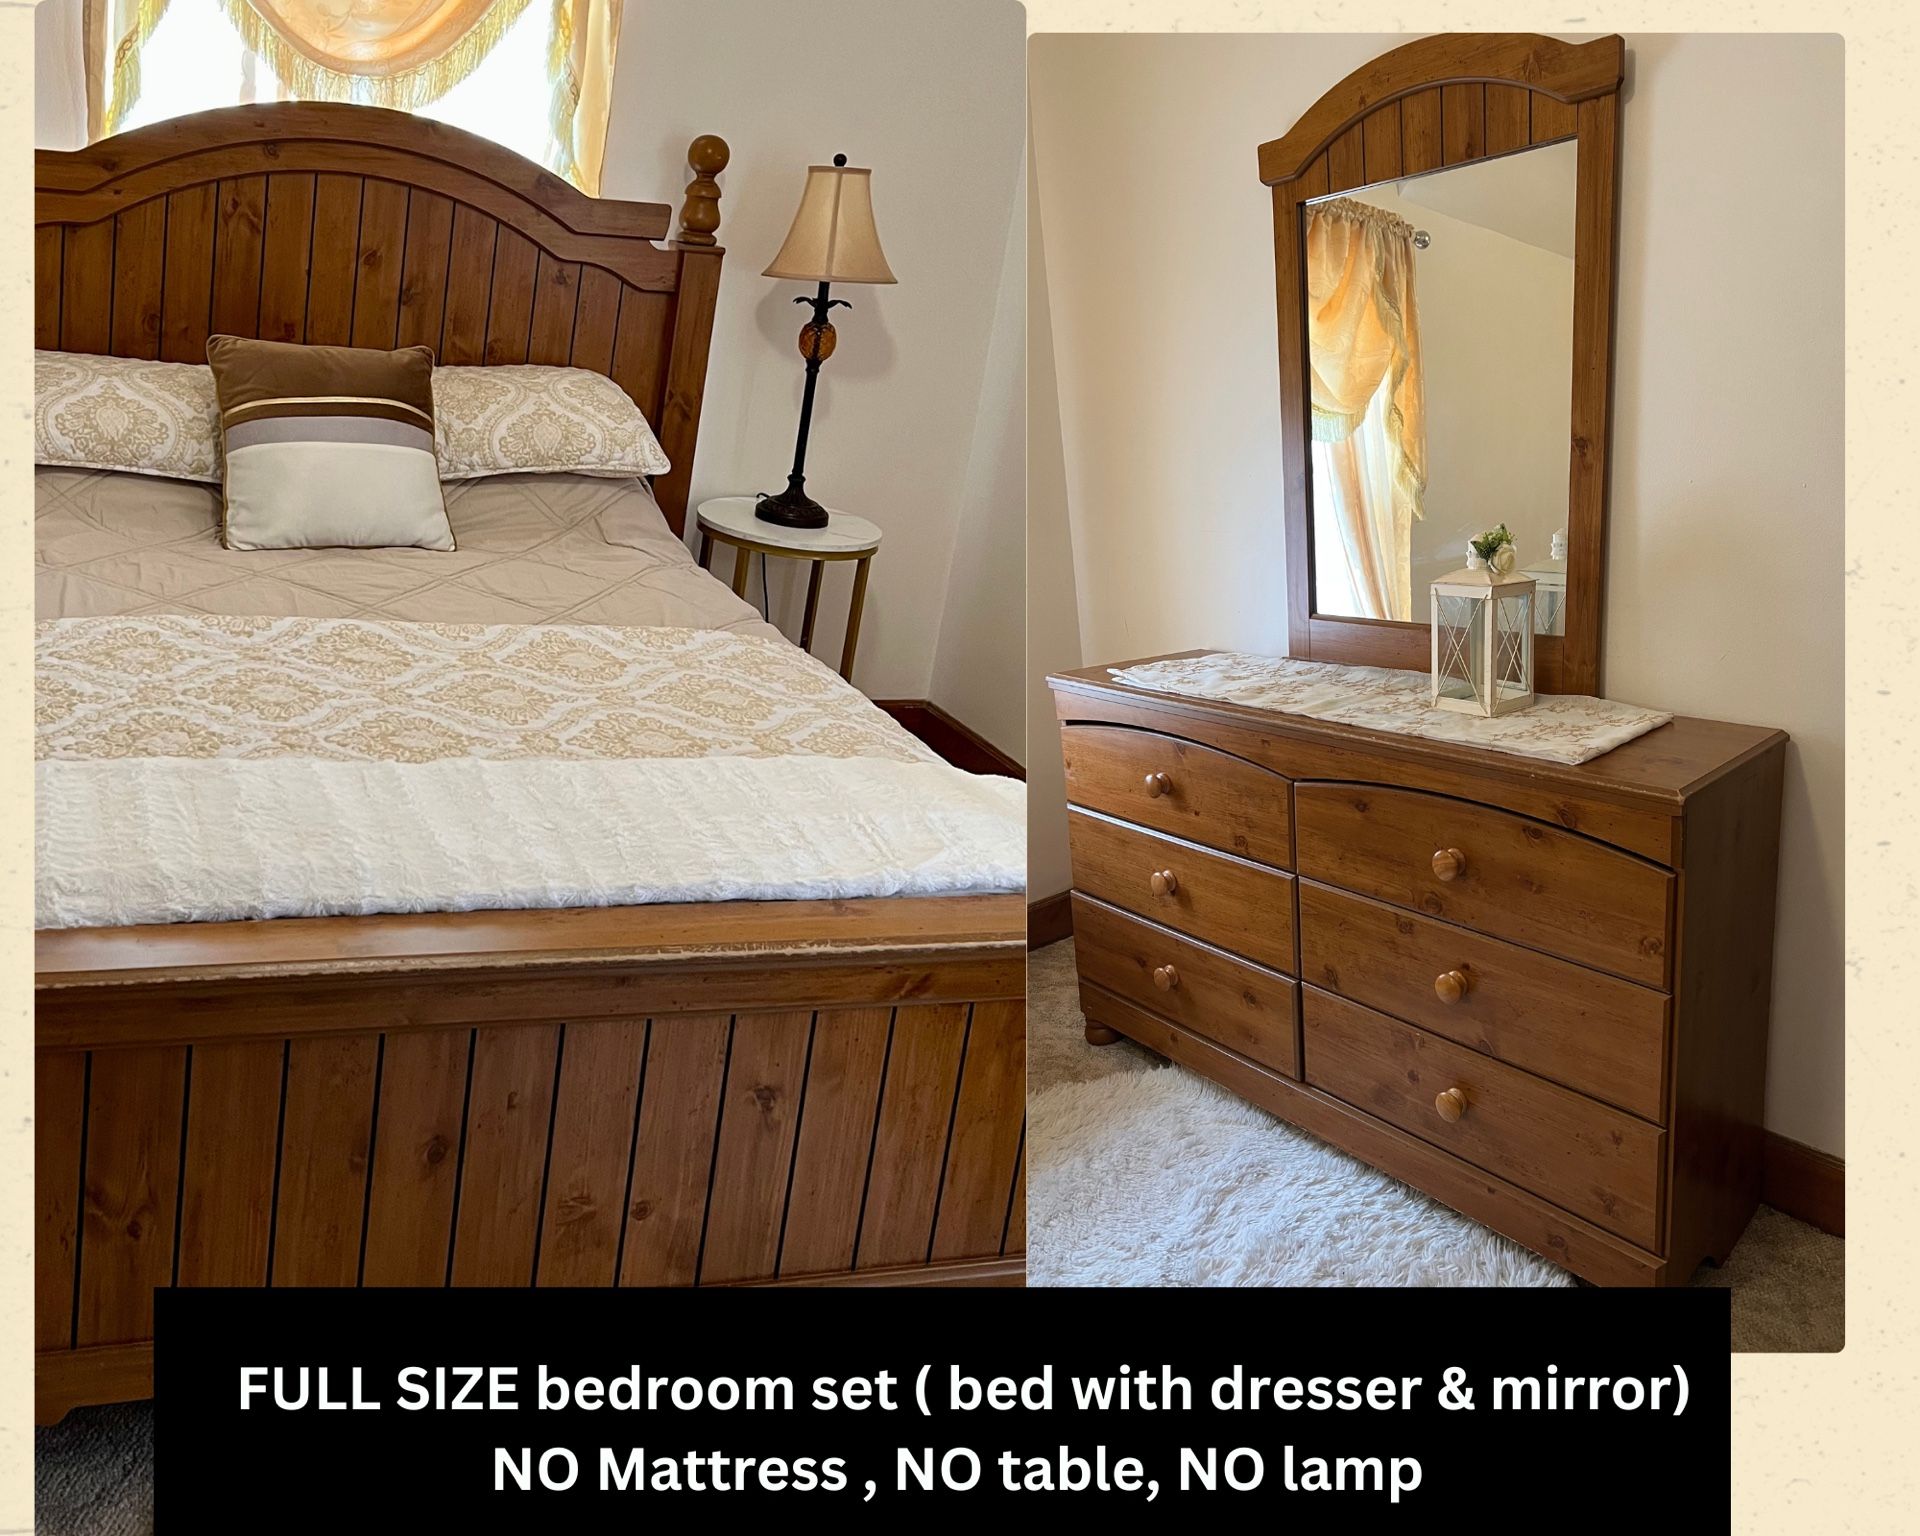 Full Size Bedroom Set -Bed With Dresser And Mirror